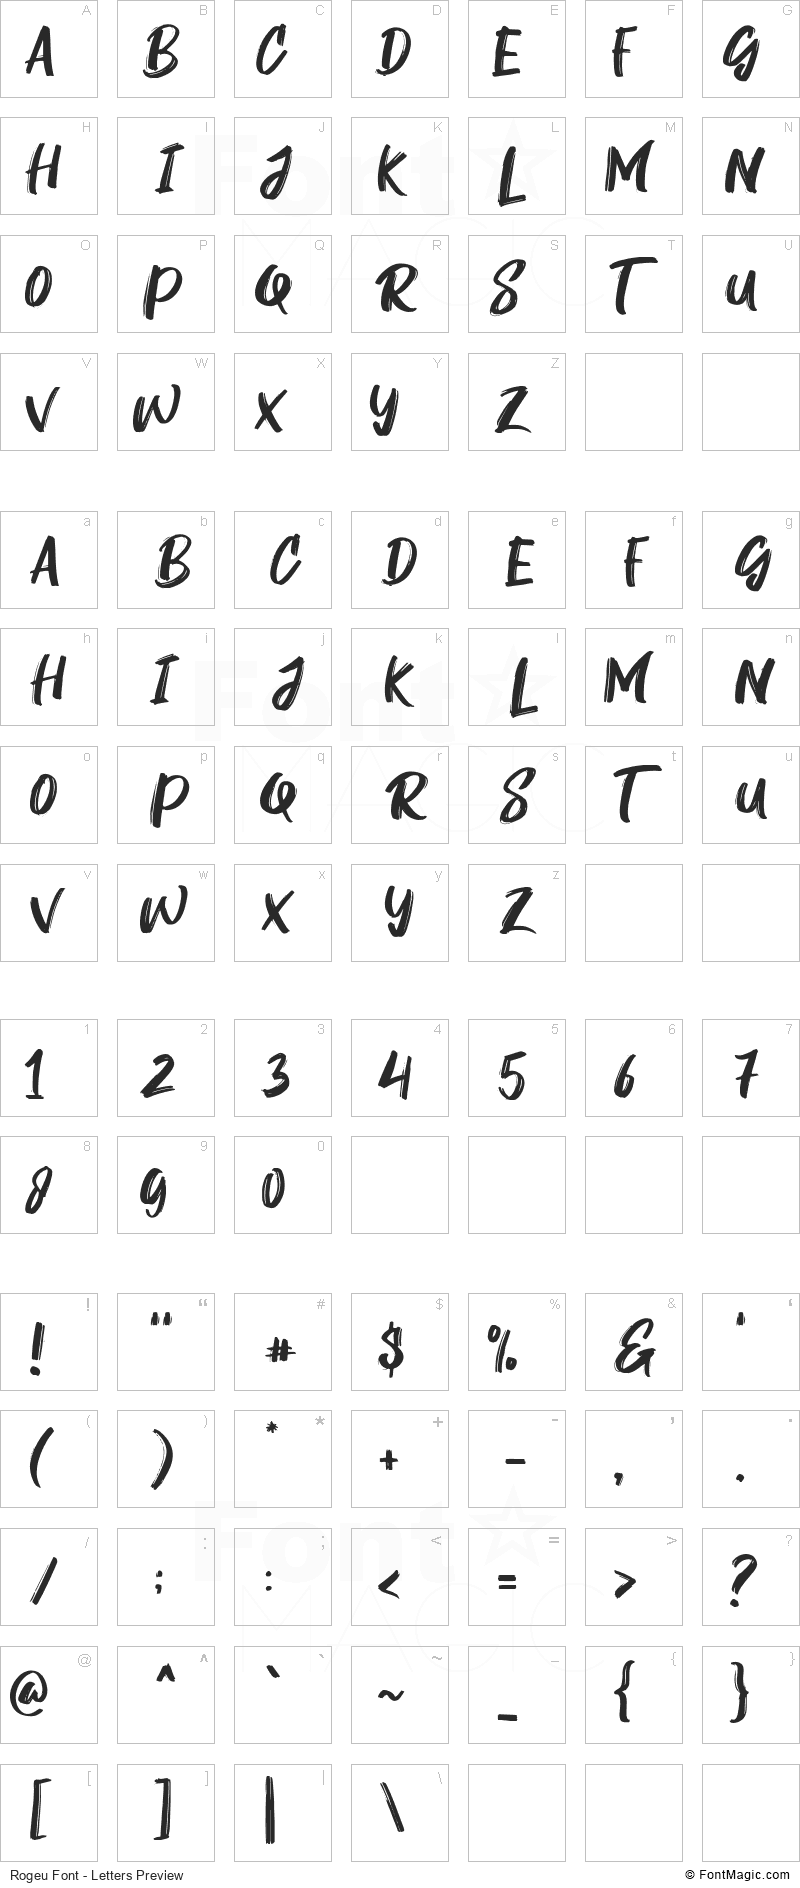 Rogeu Font - All Latters Preview Chart